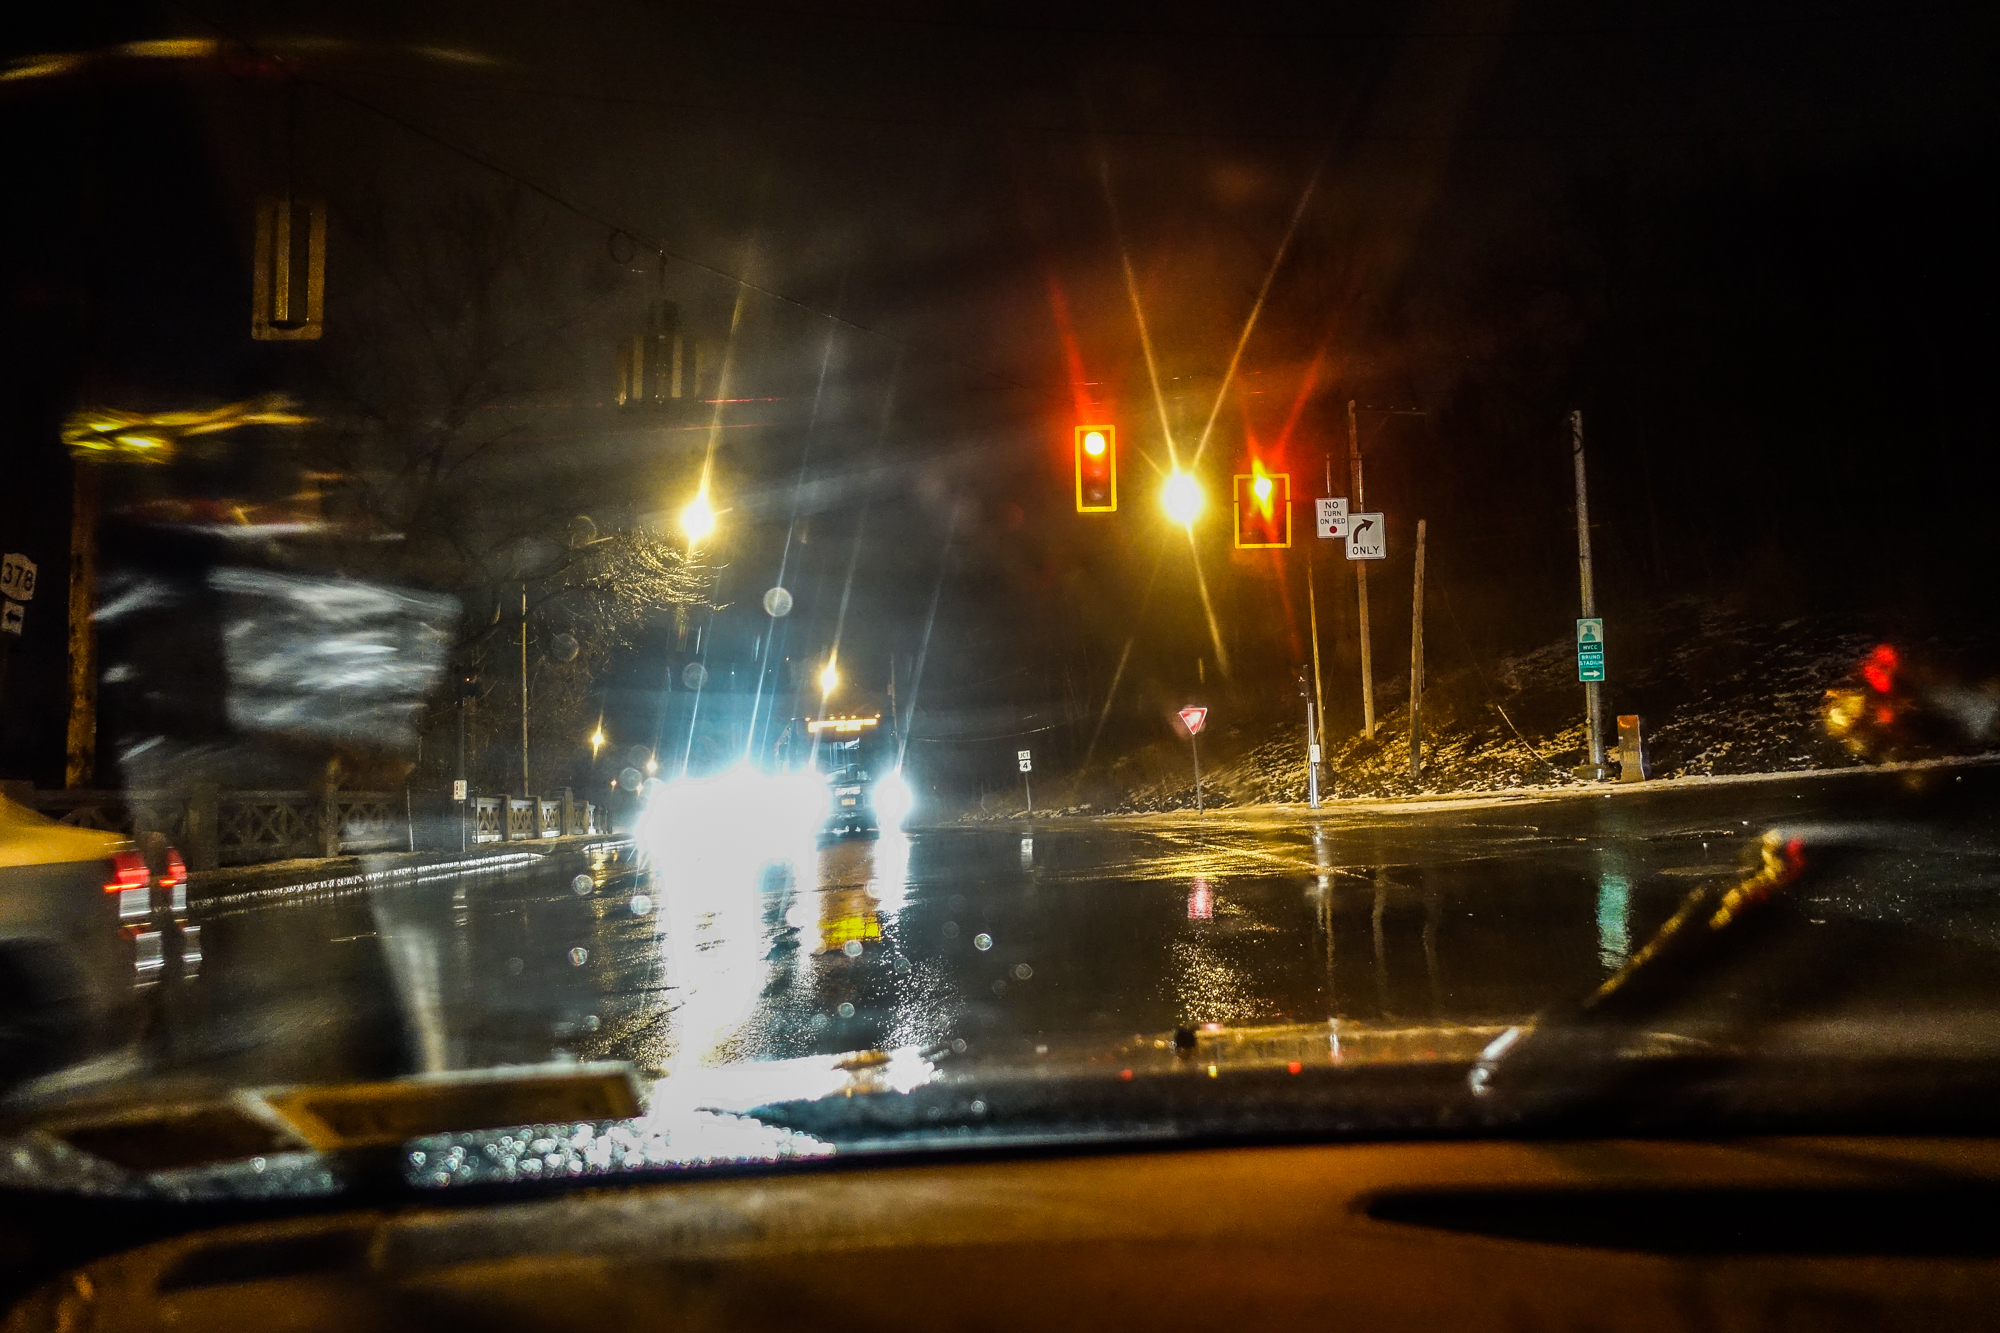 Michael_ Bach_ Driving in the rain at night, Rt. 4. Troy, New York, December 2017.jpg